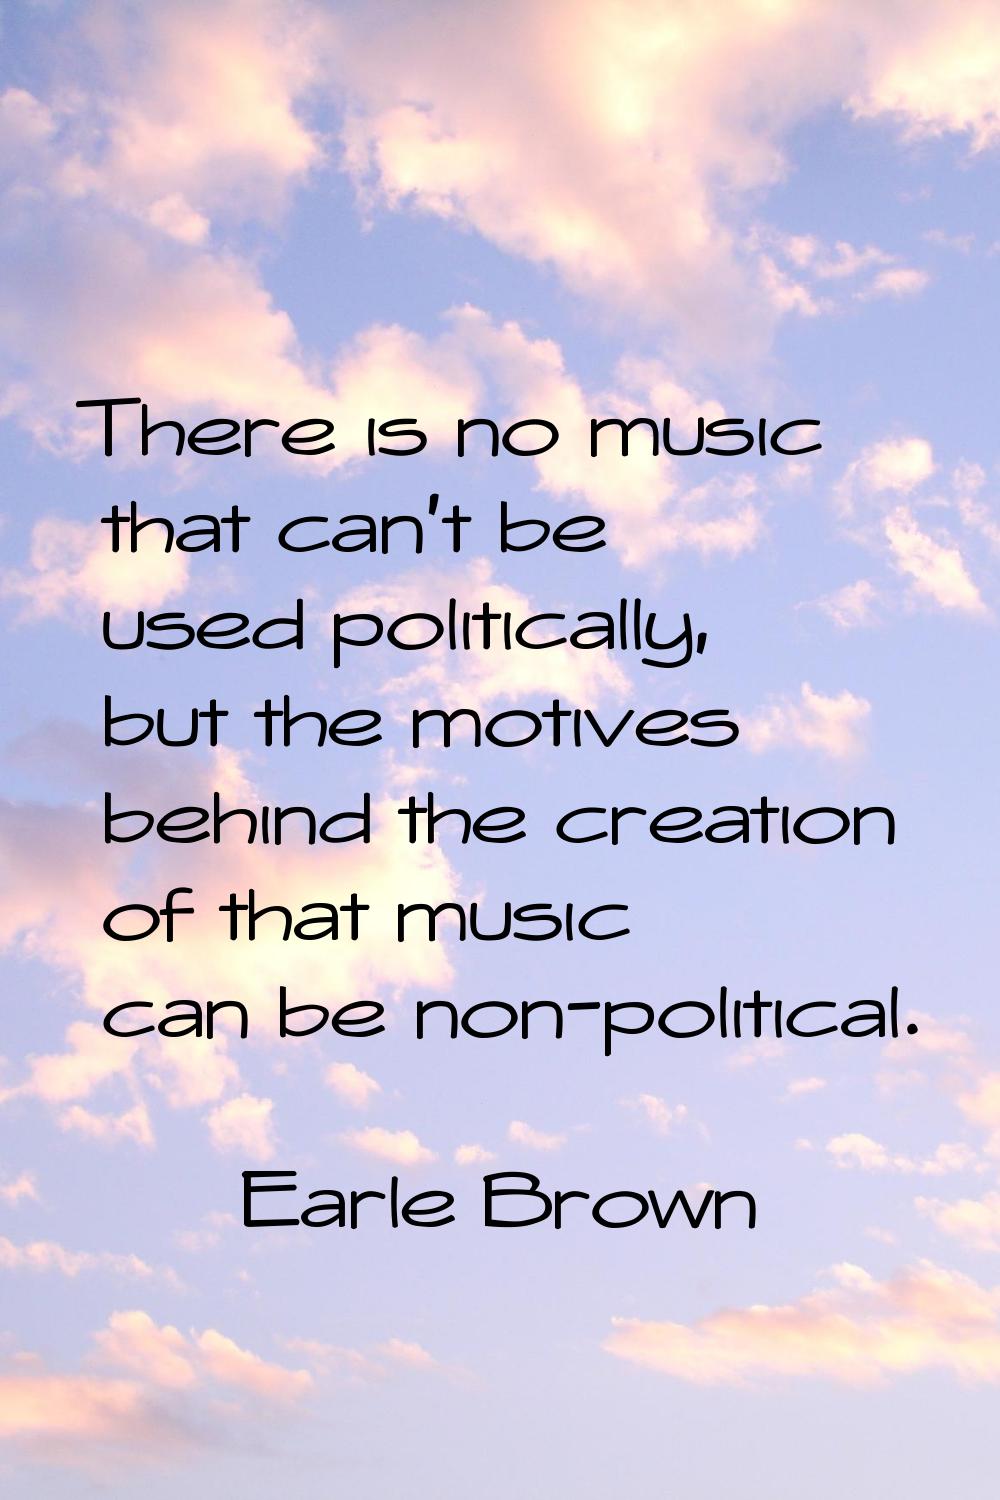 There is no music that can't be used politically, but the motives behind the creation of that music